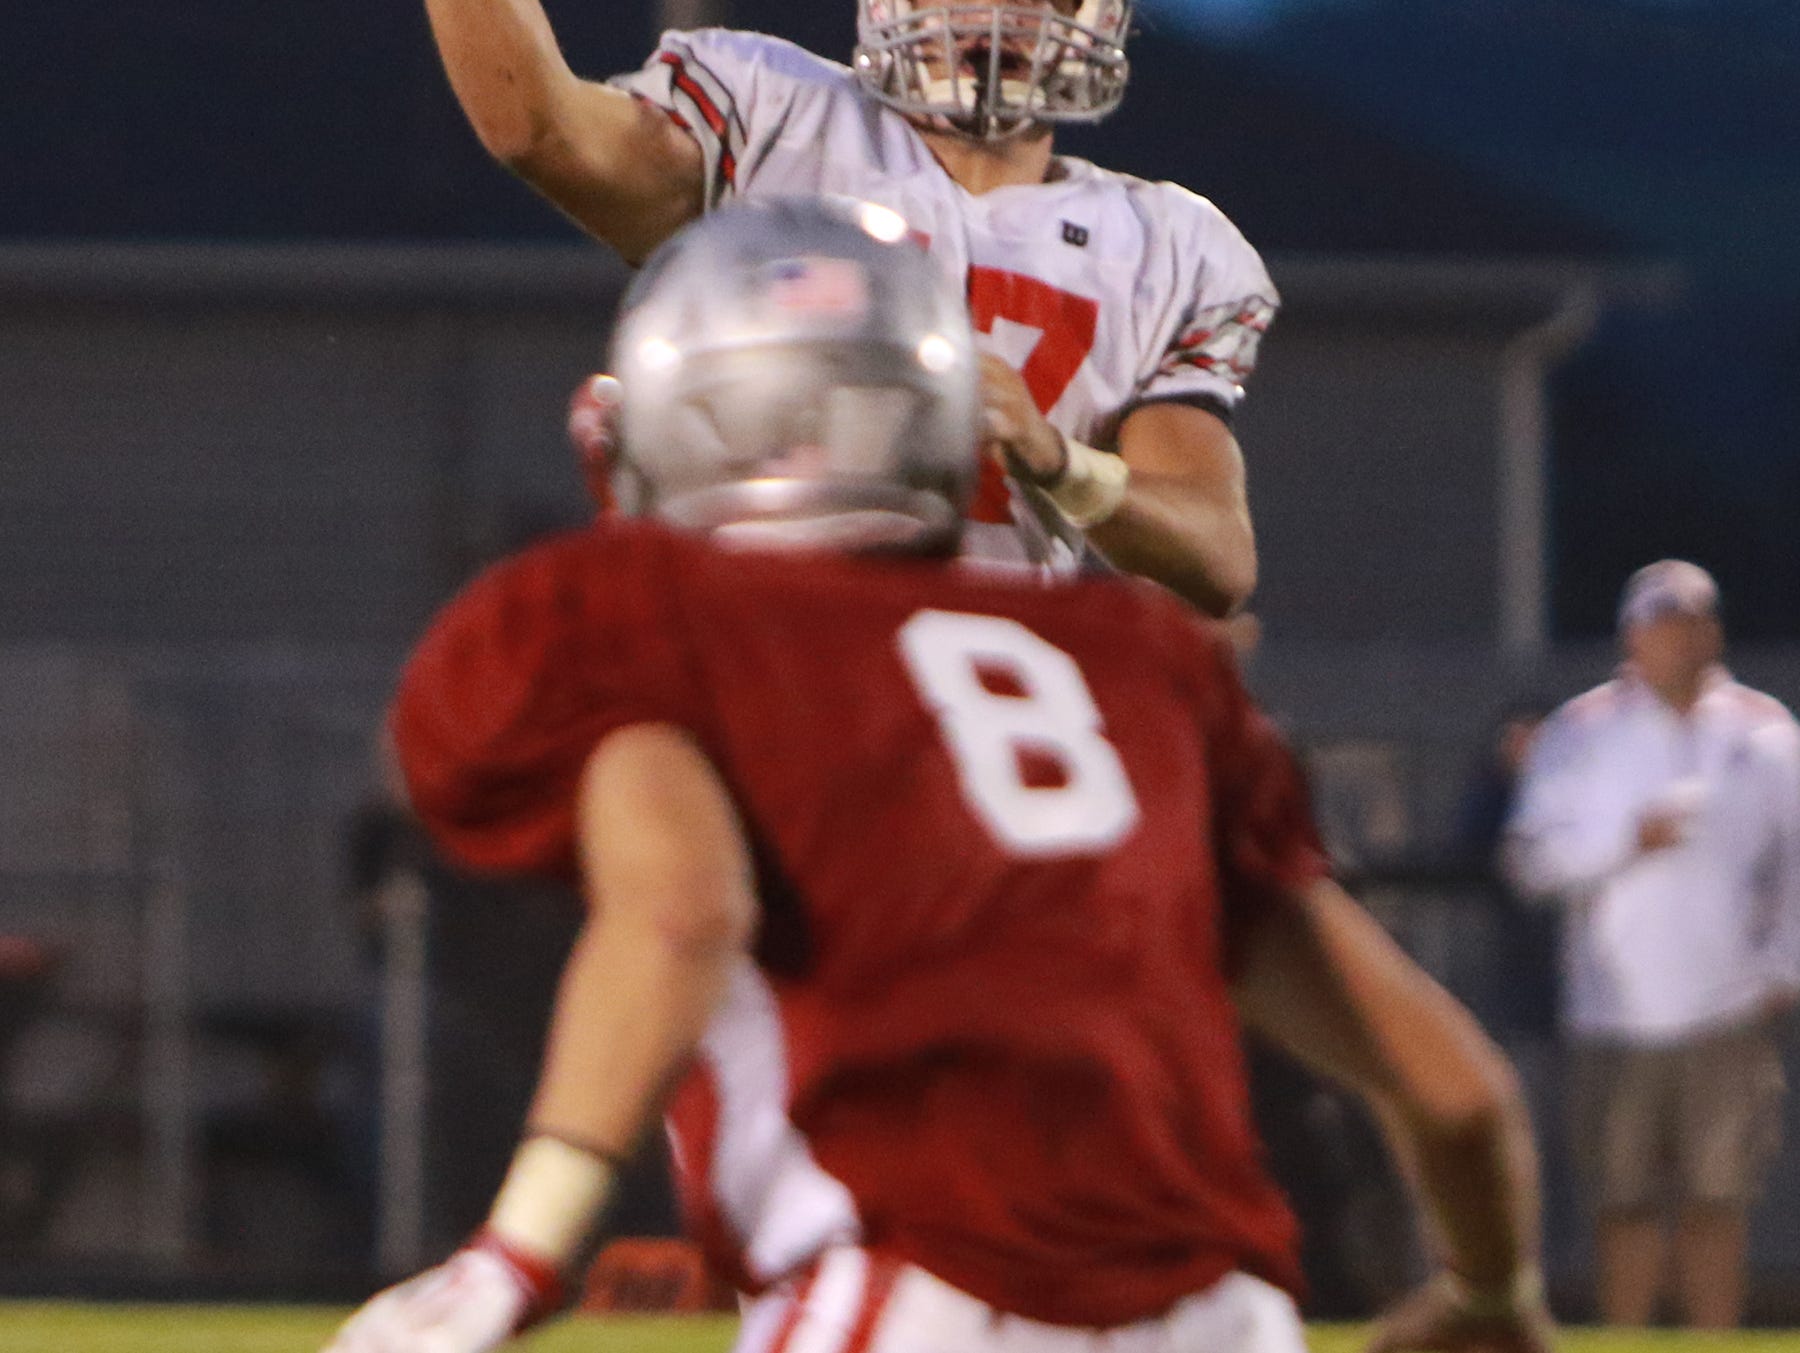 Fredericktown quarterback Dillon Smith has thrown and passed for over 1,000 yards this season.